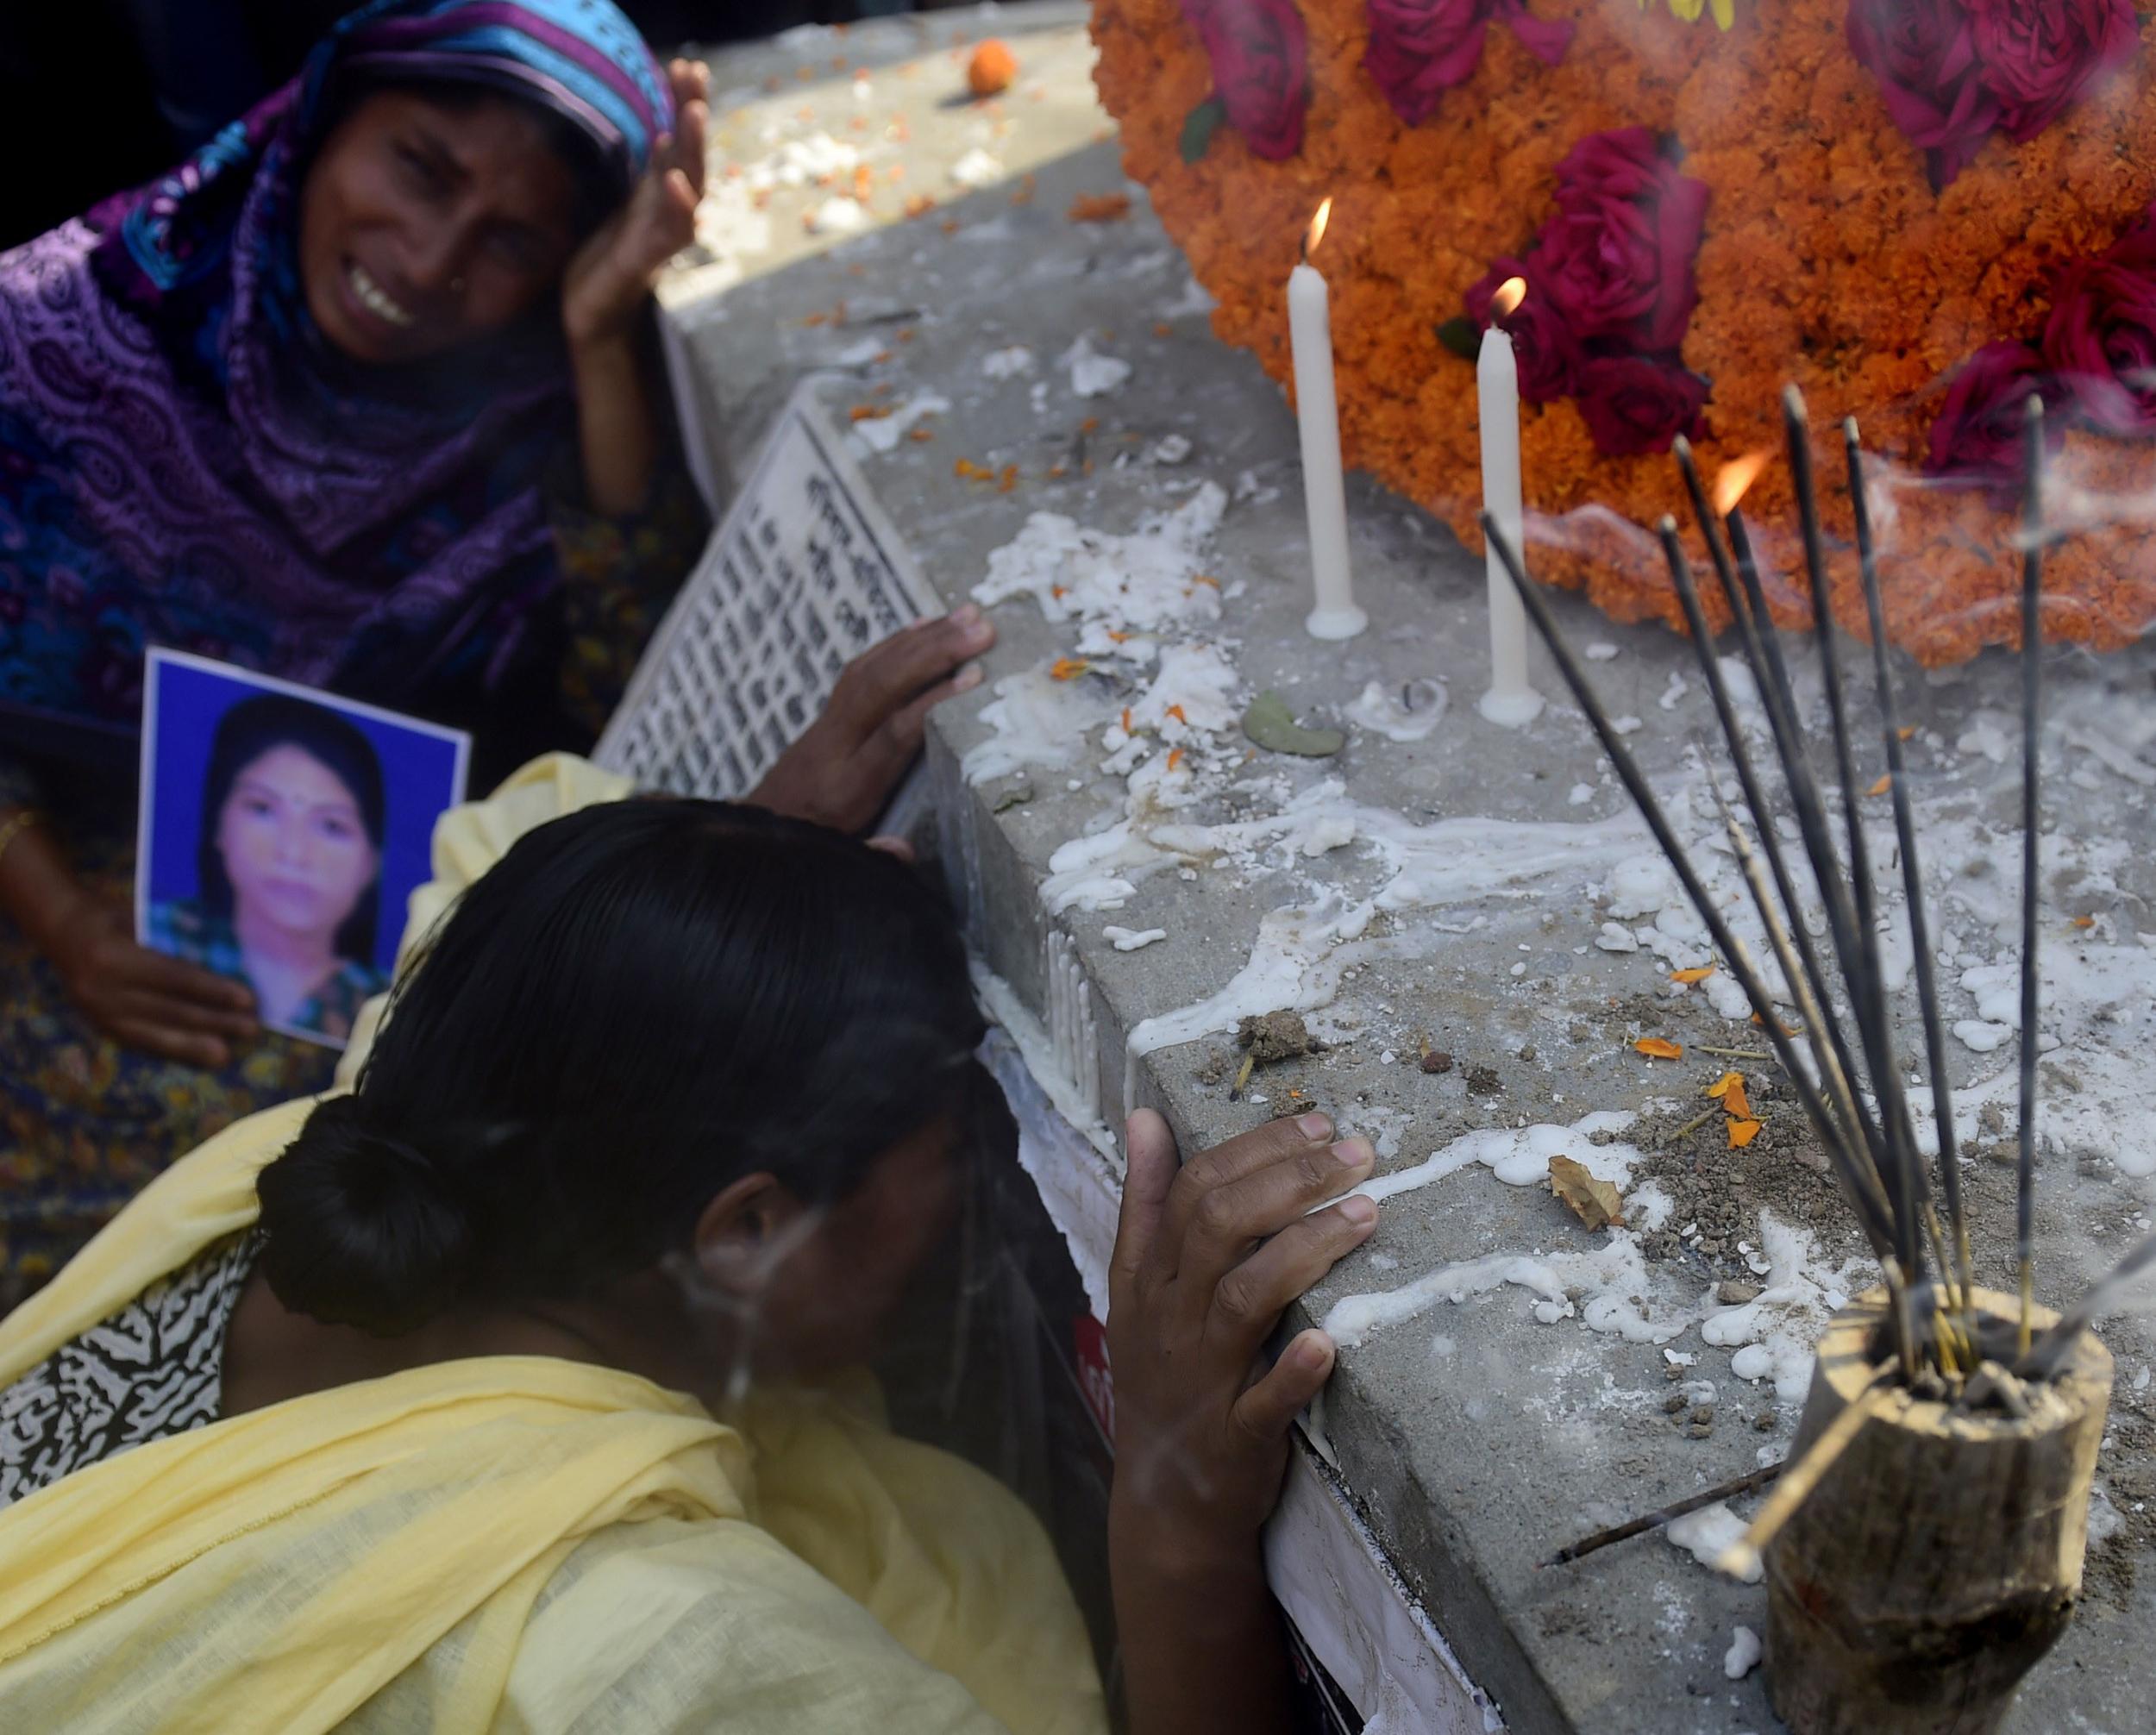 The relatives of the Rana Plaza disaster verdicts weep as they remember them two years on